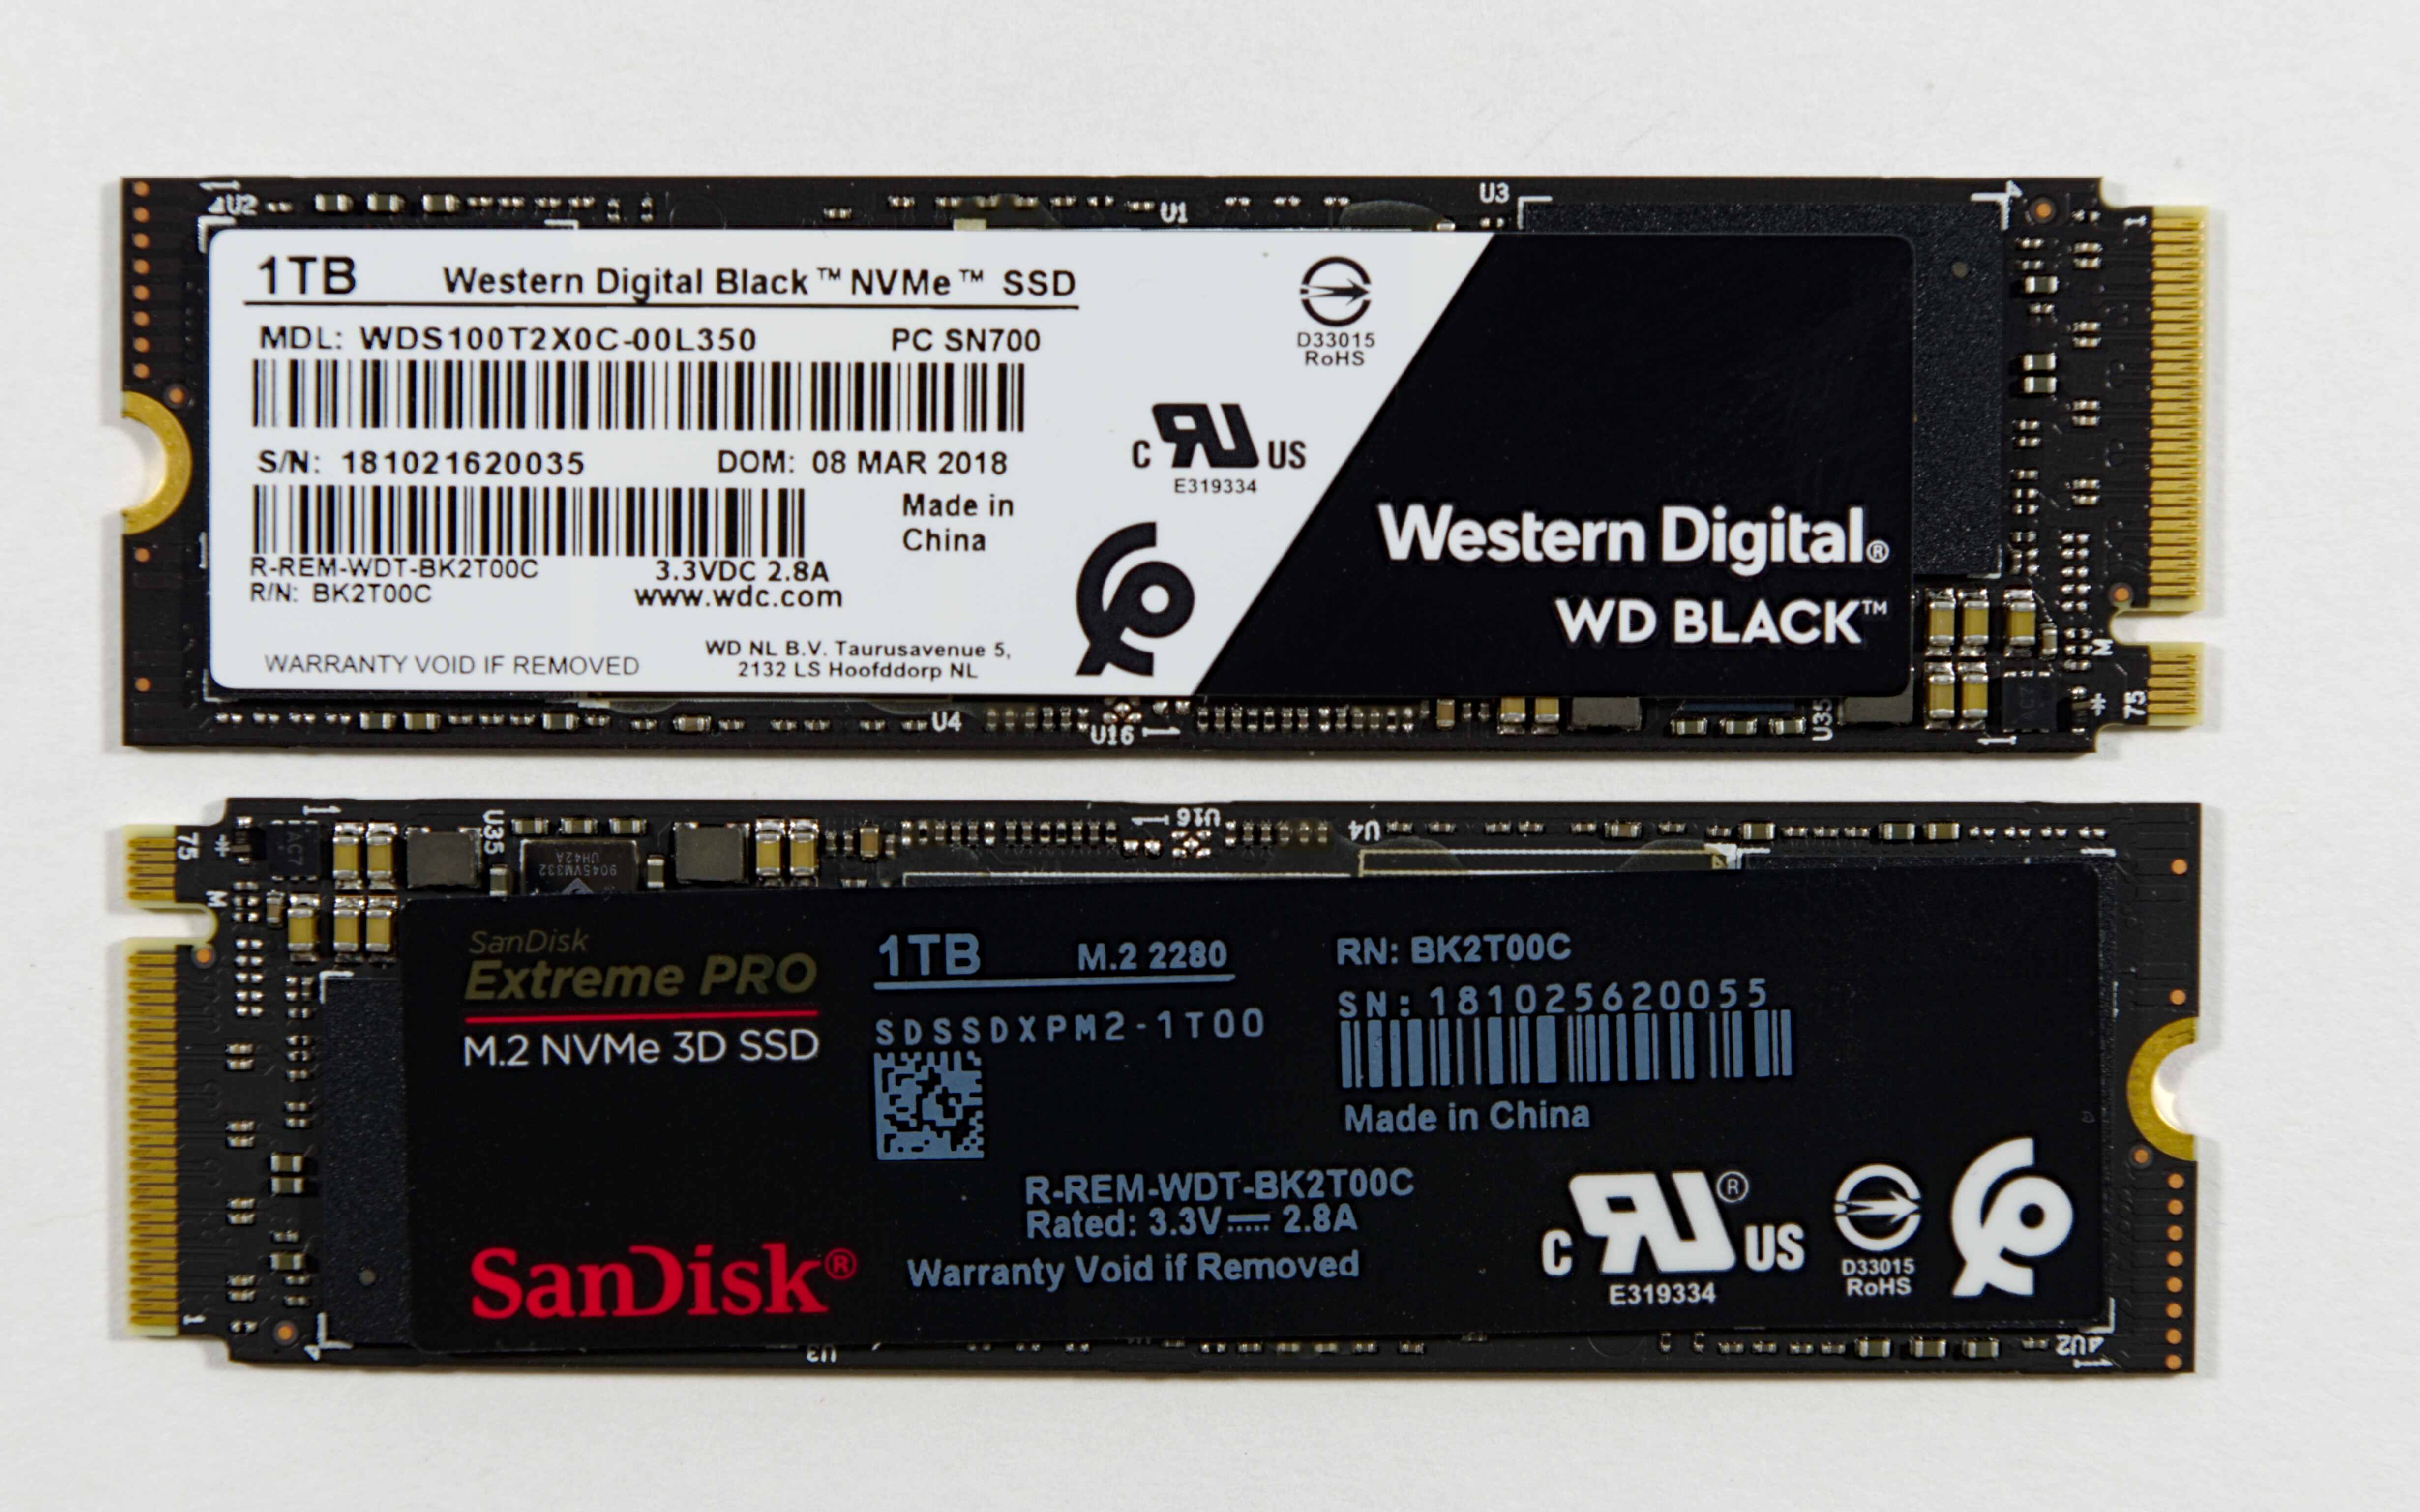 Western Digital responds to claims about SSDs failures